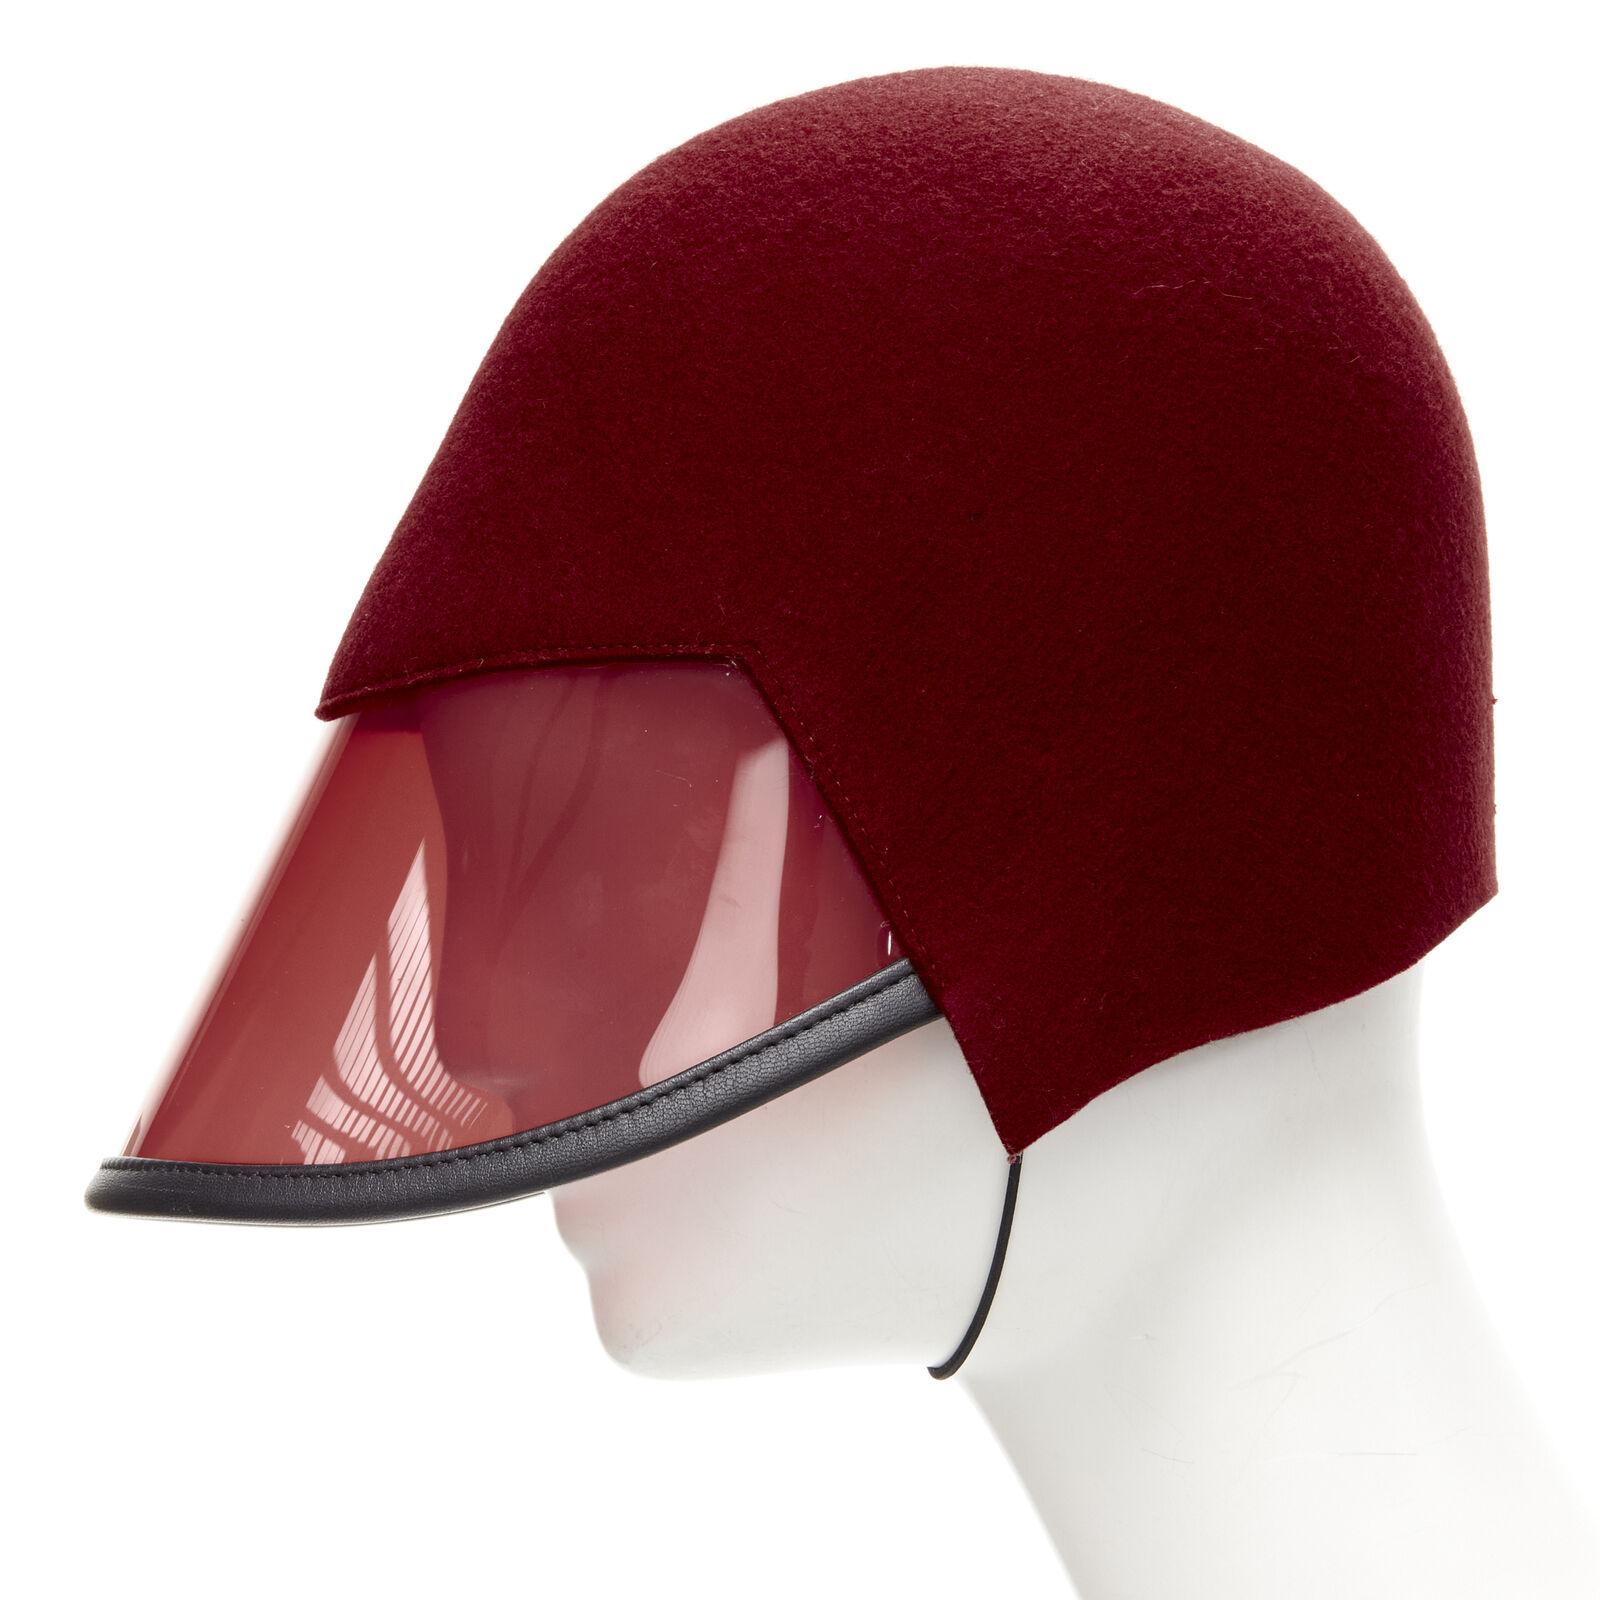 rare GUCCI Alessandro Michele red wool felt leather trim clear visor hat
Reference: TGAS/C01513
Brand: Gucci
Designer: Alessandro Michele
Model: 5900513 
Collection: Runway
Material: 100% Wool
Color: Burgundy, Black
Pattern: Solid
Extra Details: